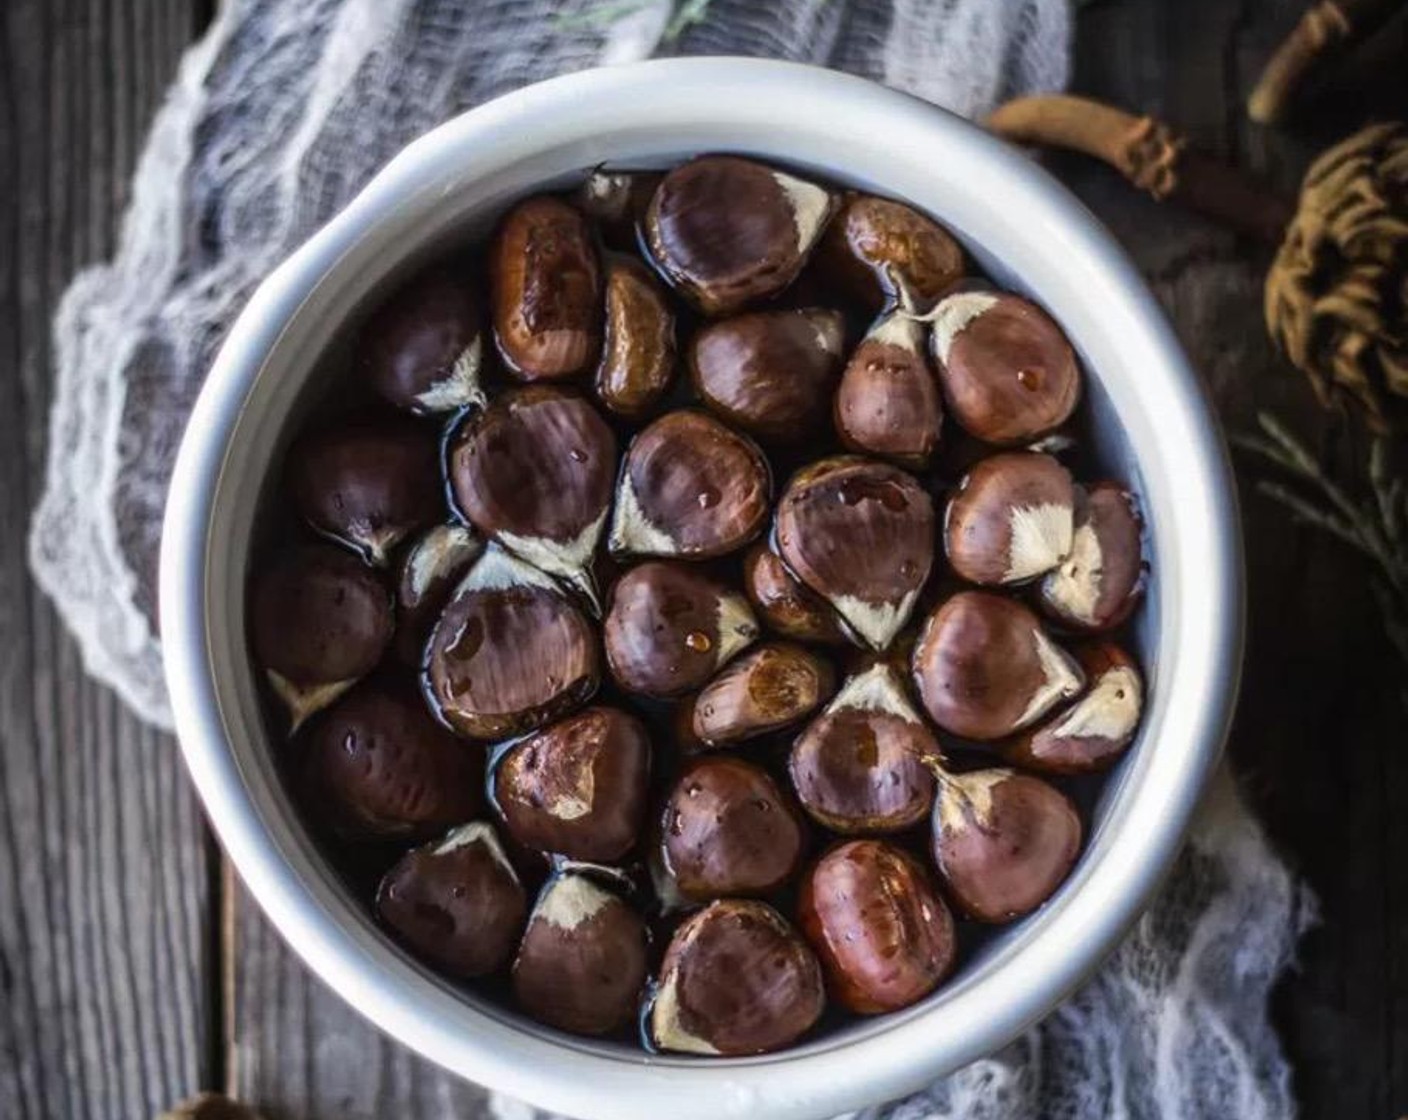 step 3 While you slit the chestnuts, bring a kettle or pot of water to a boil. Once all of the chestnuts are slit and the water has come to a boil, pour the boiling water over the chestnuts and let them soak until the water has come to room temperature for about 30-45 minutes.